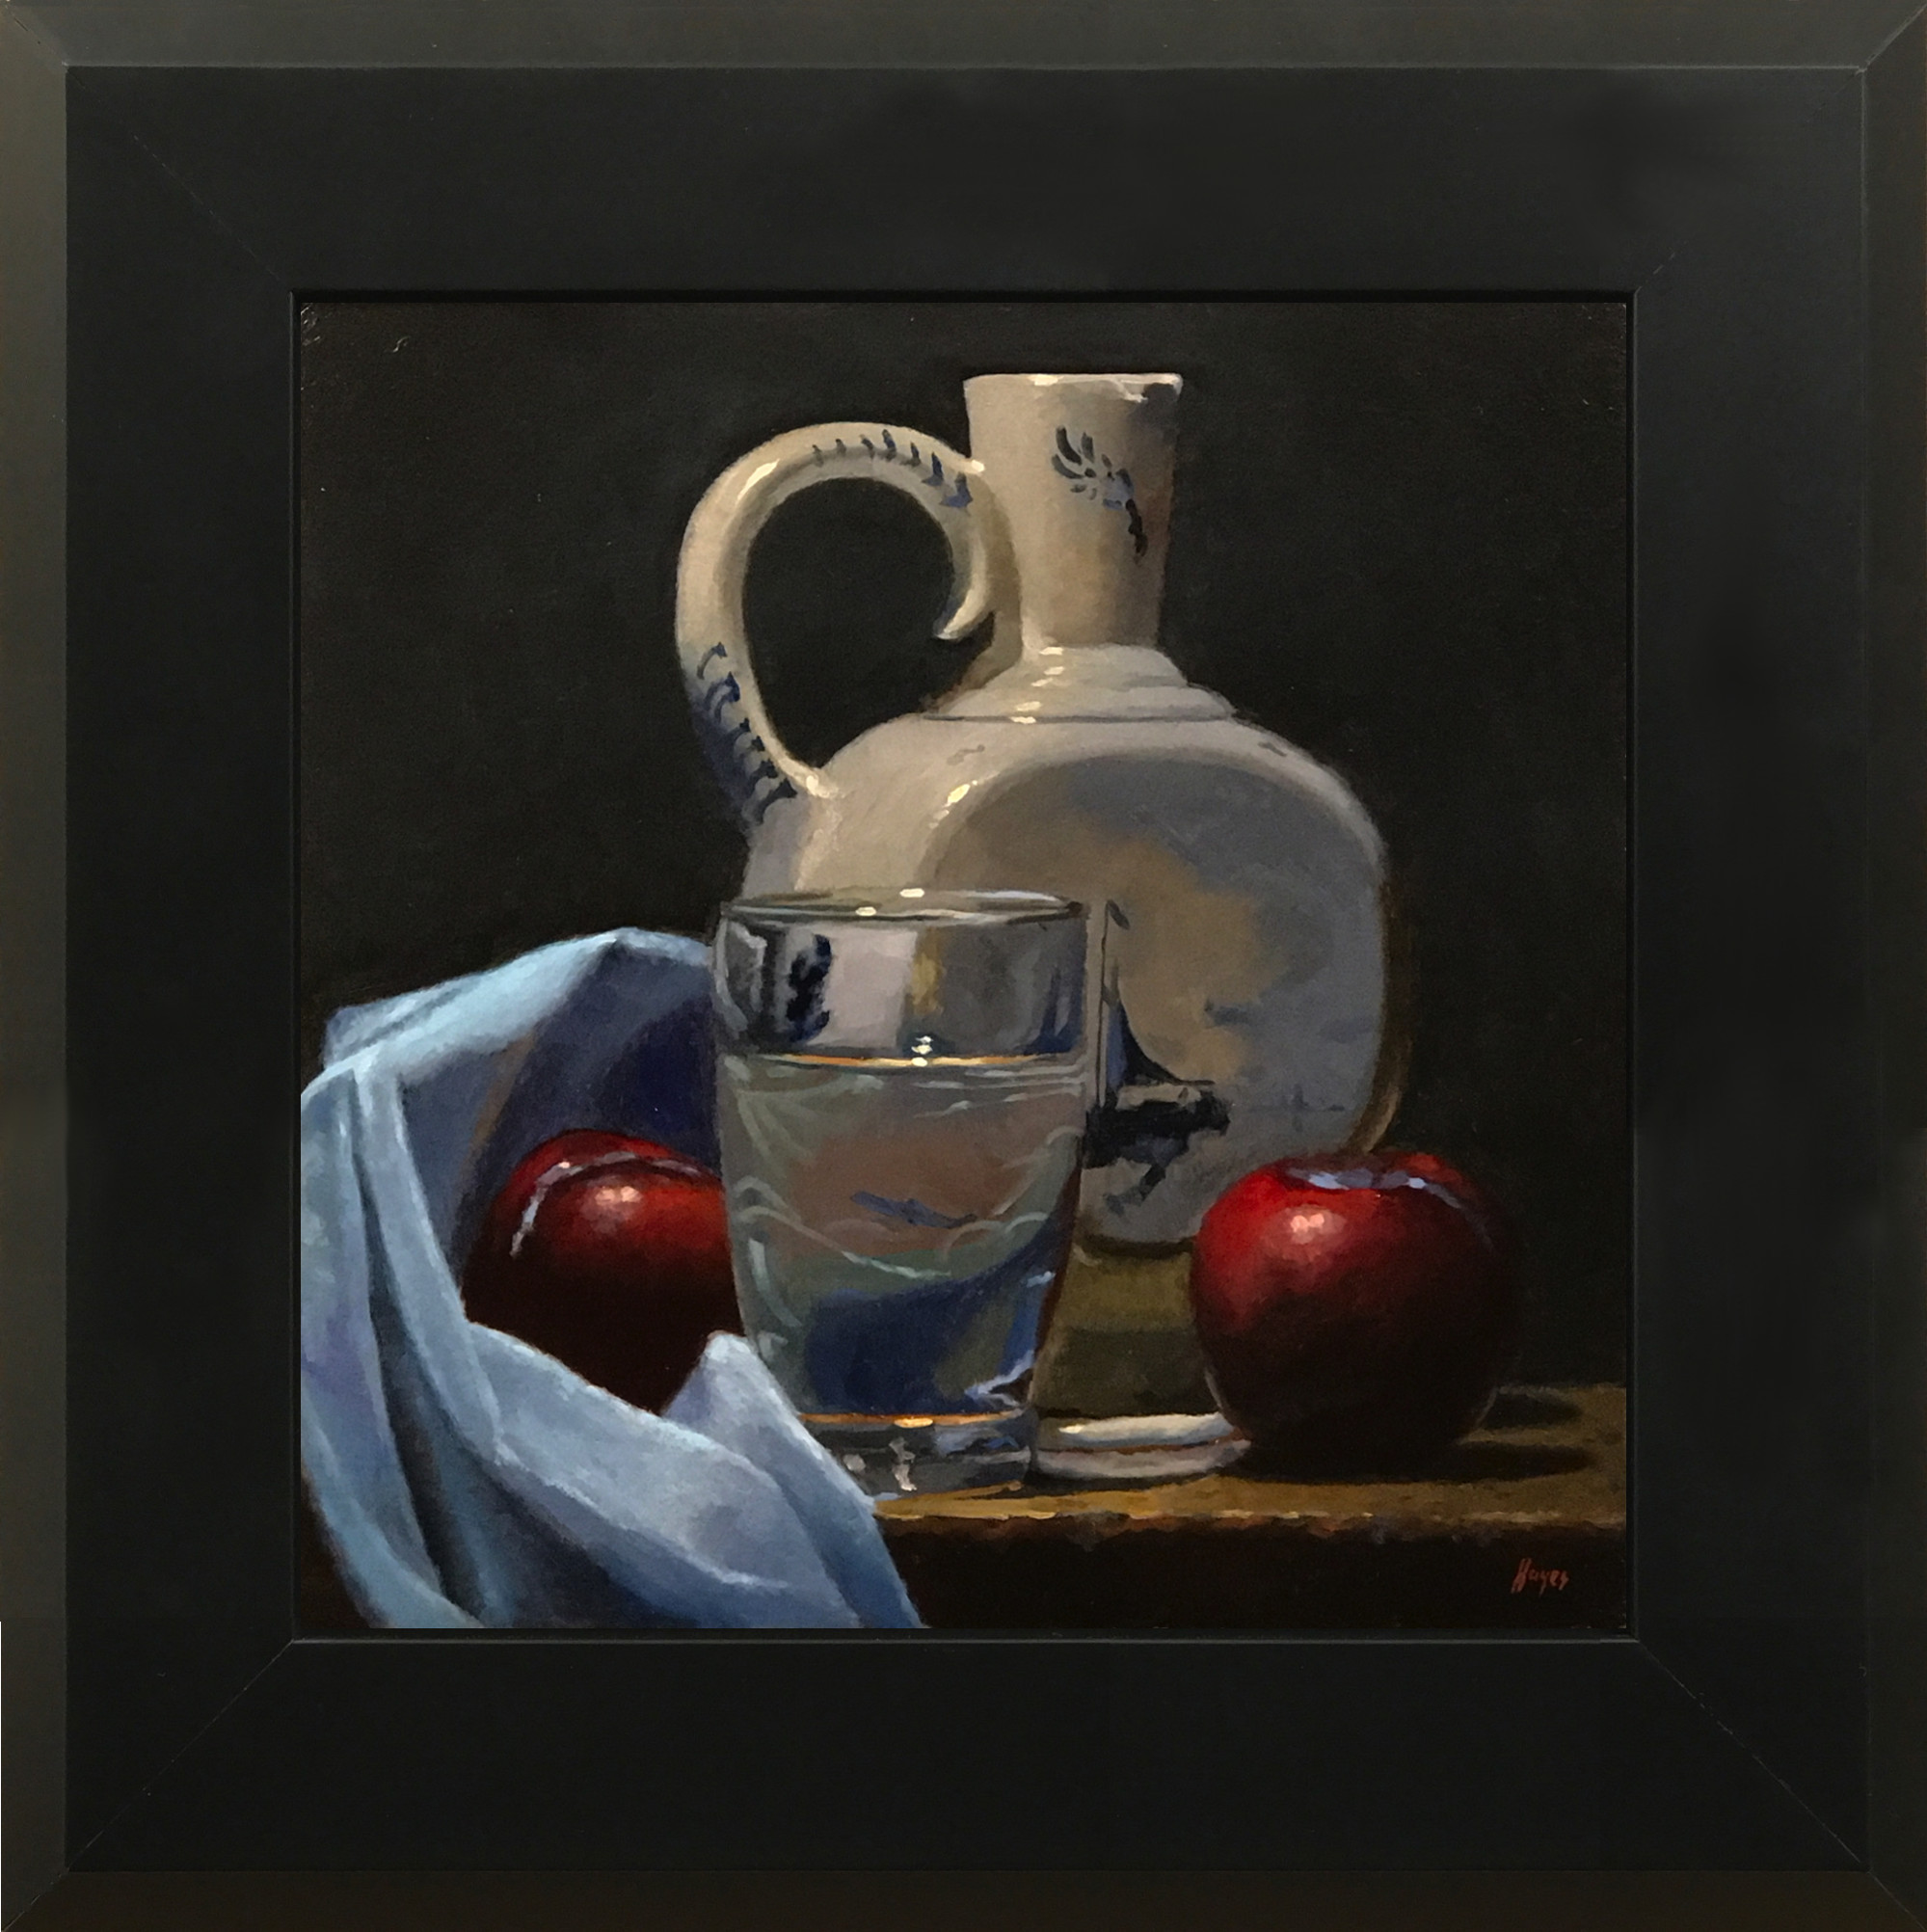 "Delft Pitcher, Water Glass, Plums"
View this painting